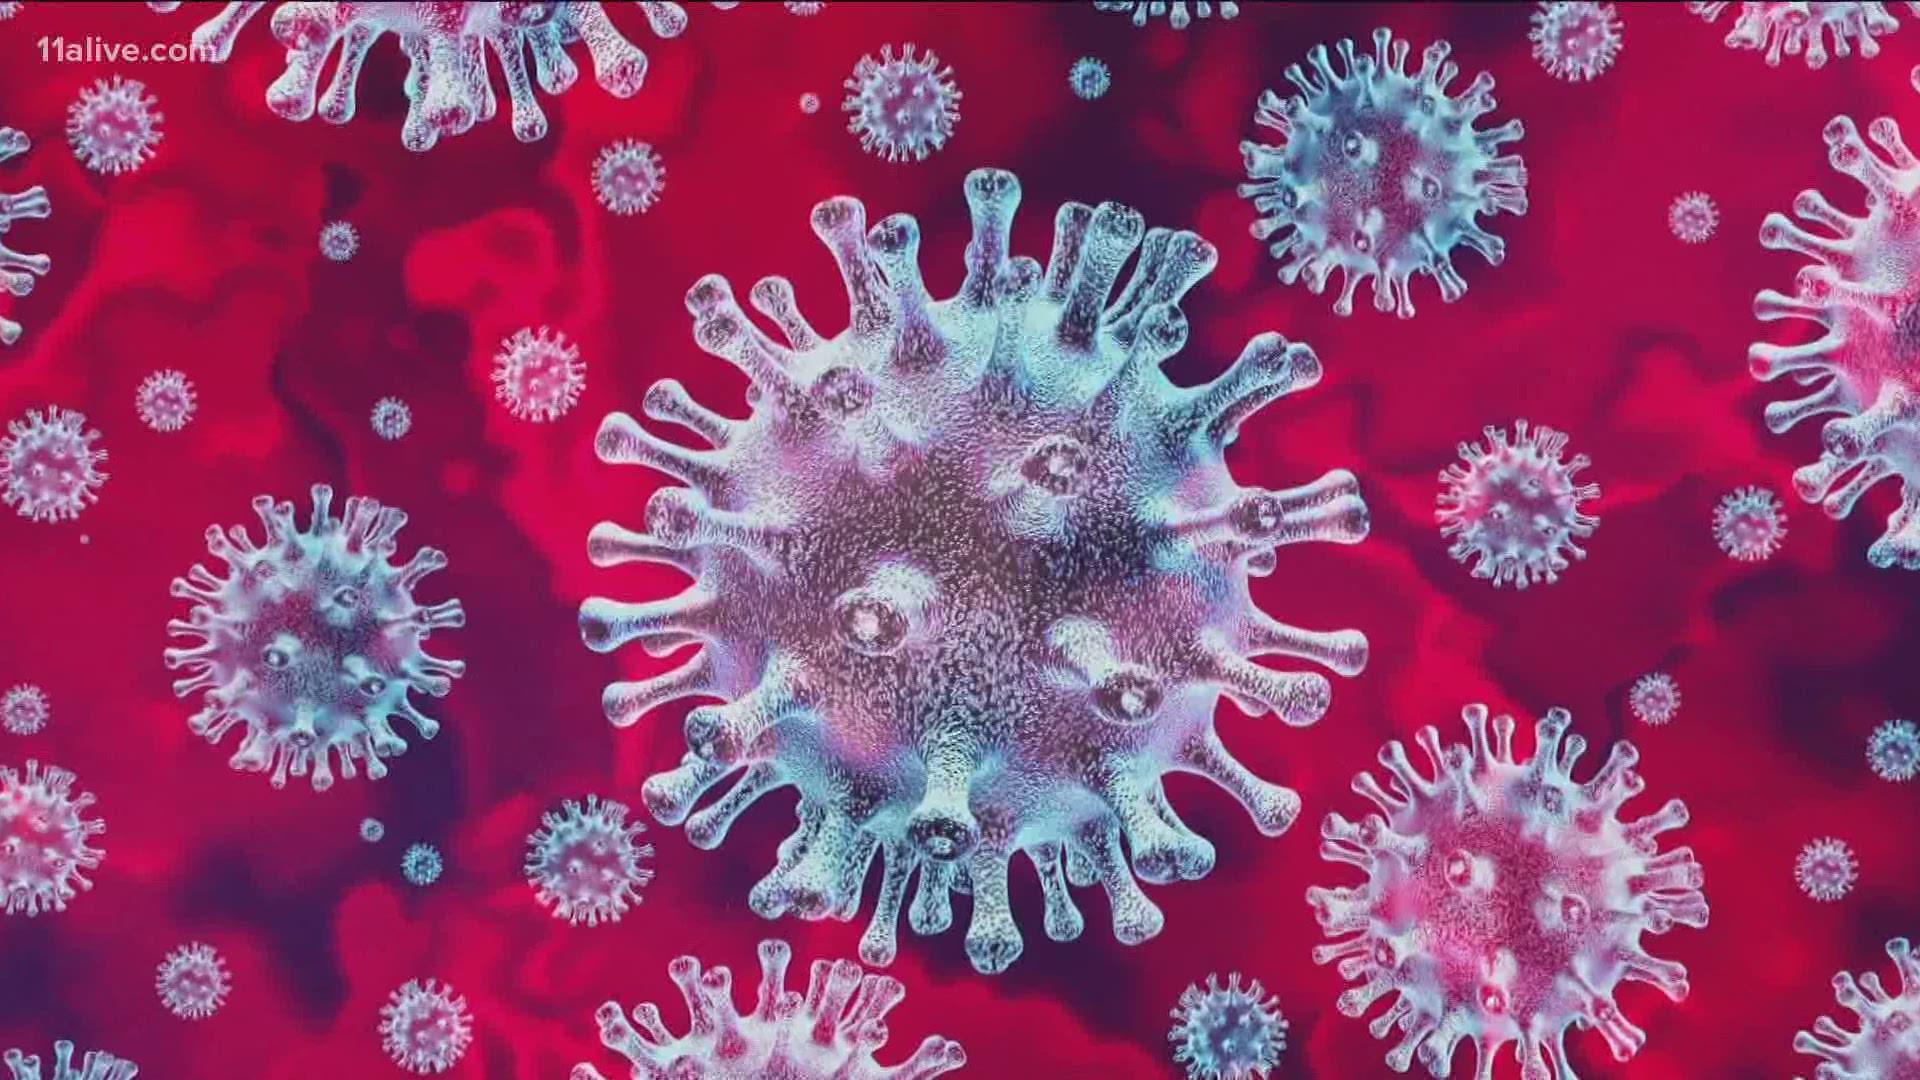 The way that the coronavirus outbreak is affecting people in Georgia is changing, according to researchers from Emory University.